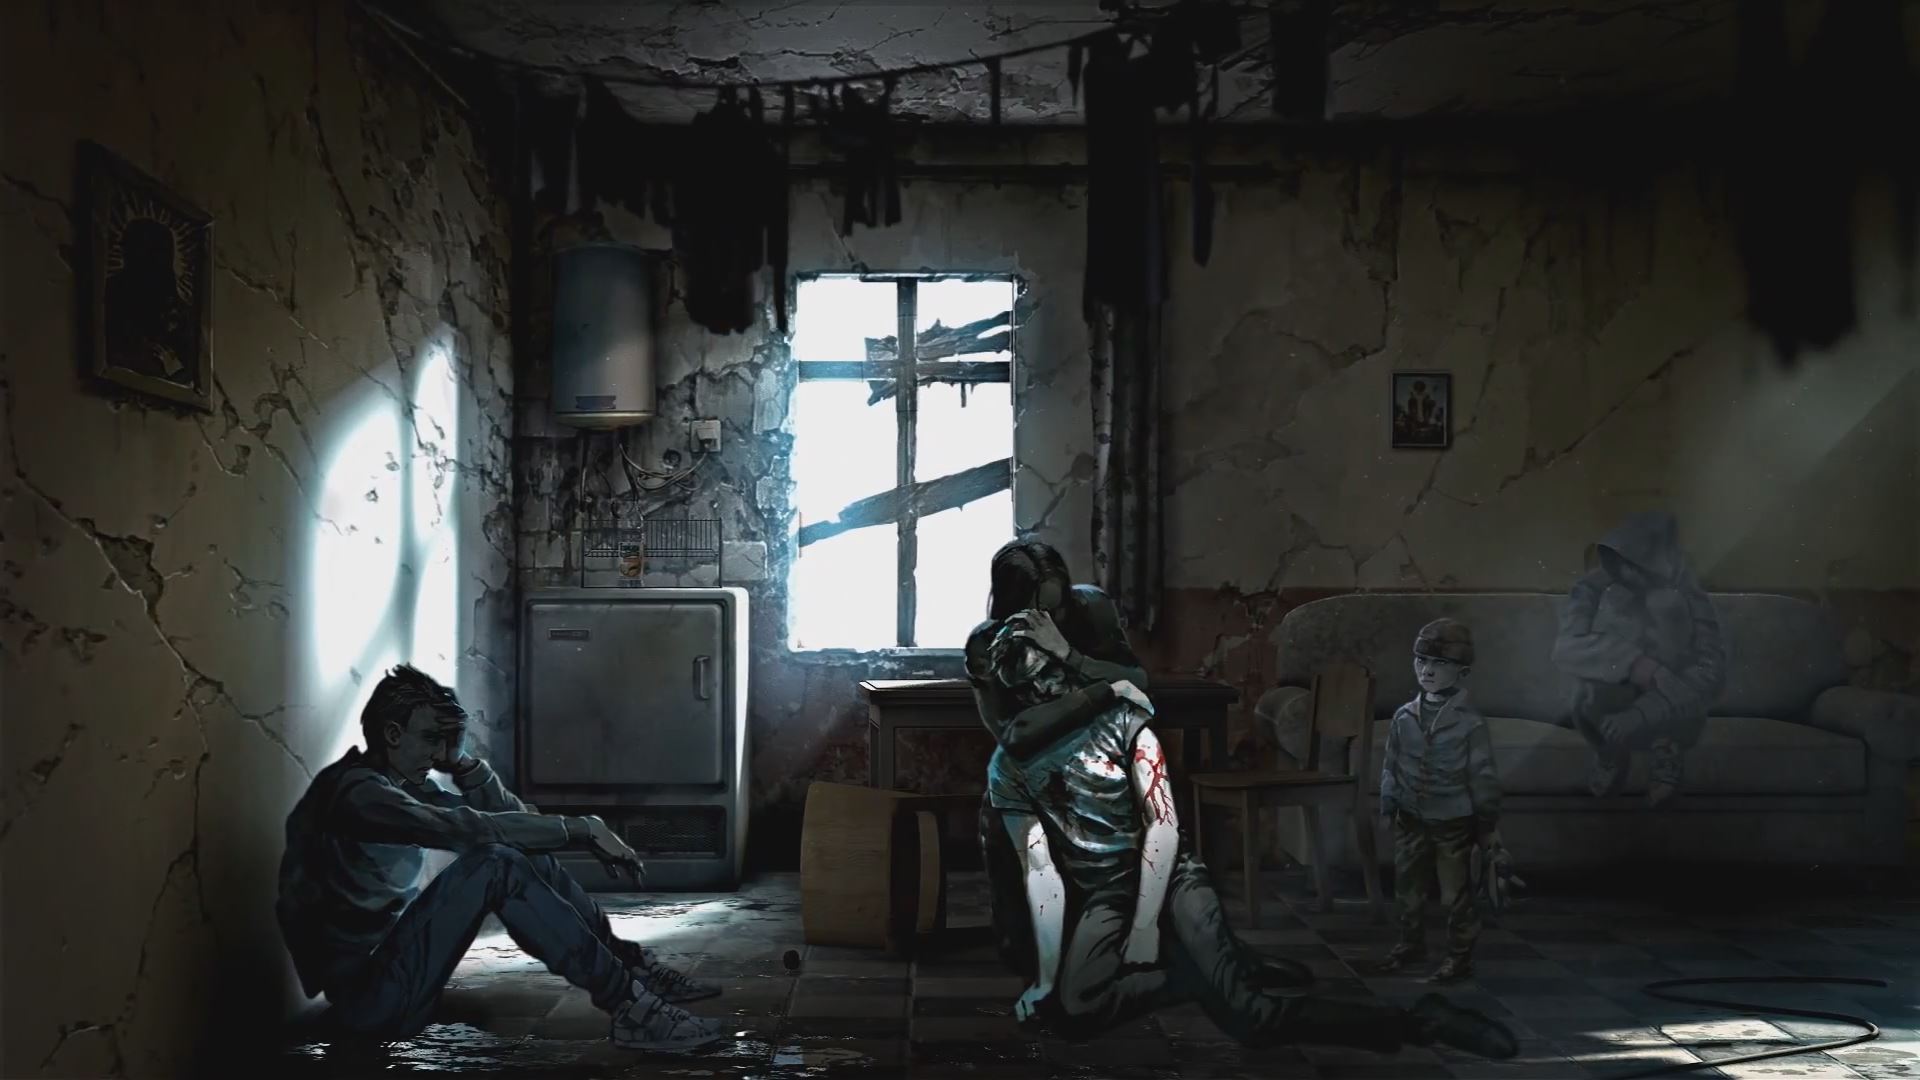 This War of Mine combines history with zombie survival